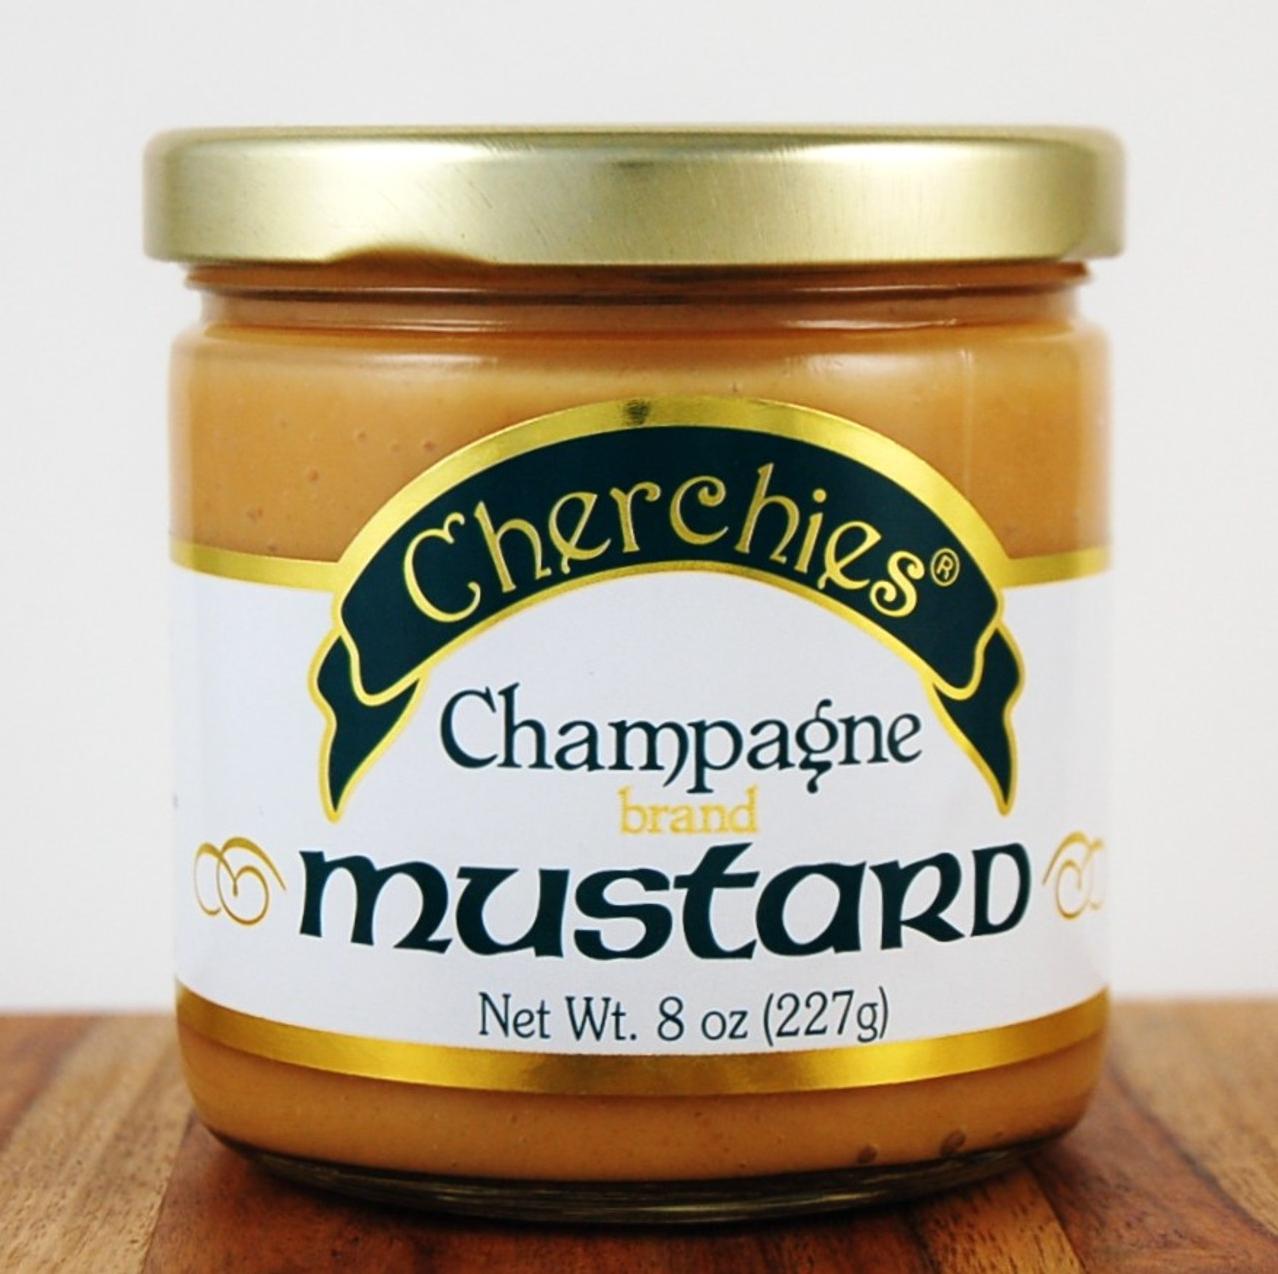  Elevate Your Sandwich Game with This Tasty Champagne Mustard Recipe